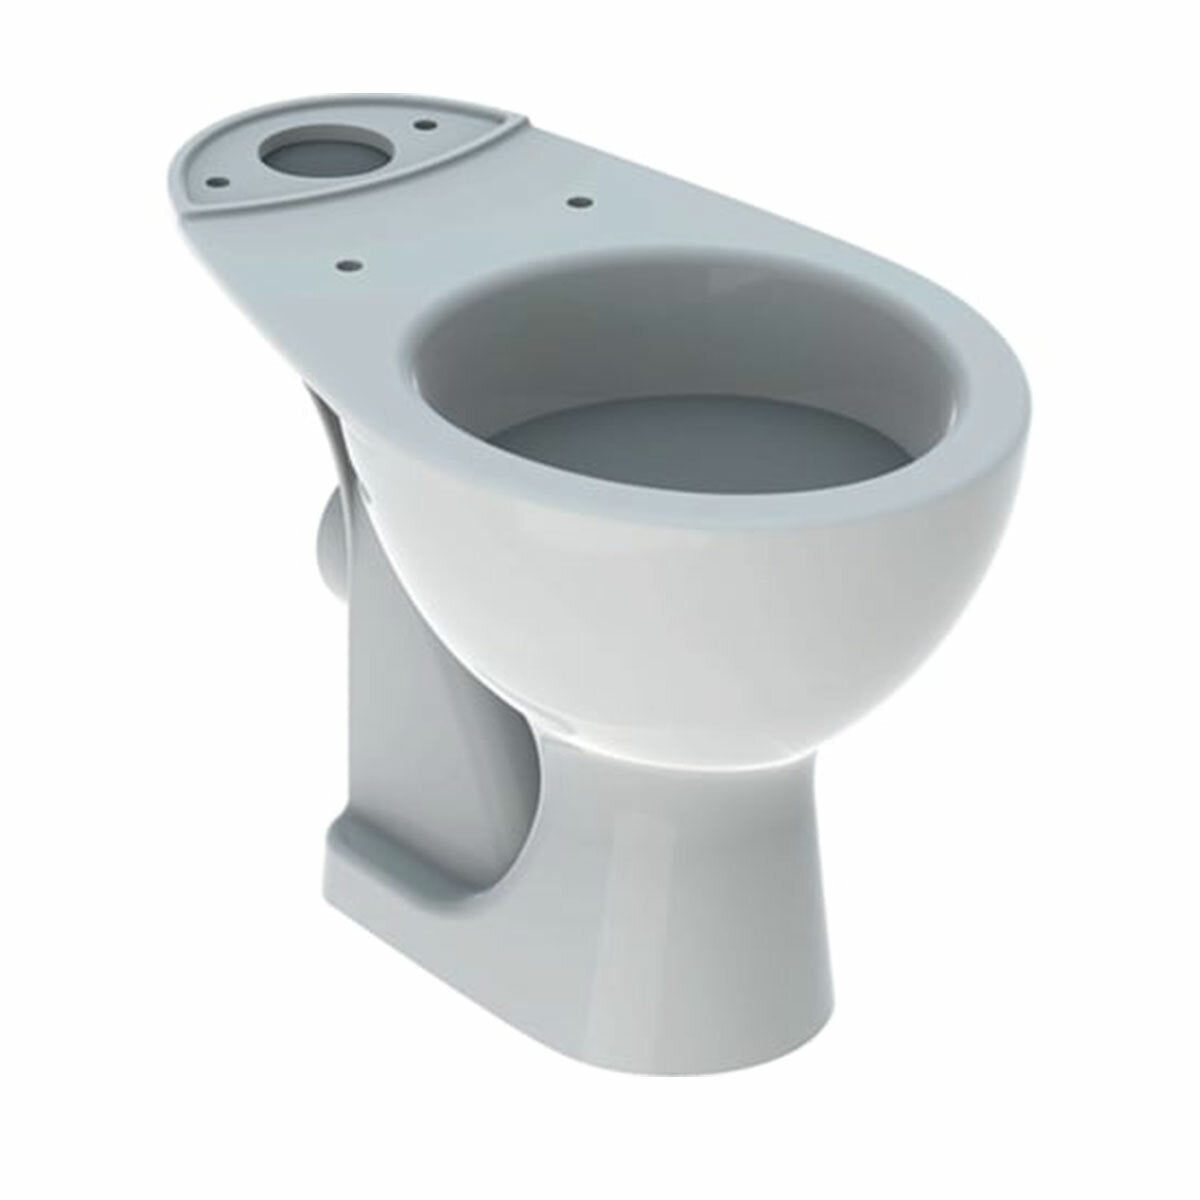 Geberit Colibrì floor standing WC for monobloc external cistern with wall drain